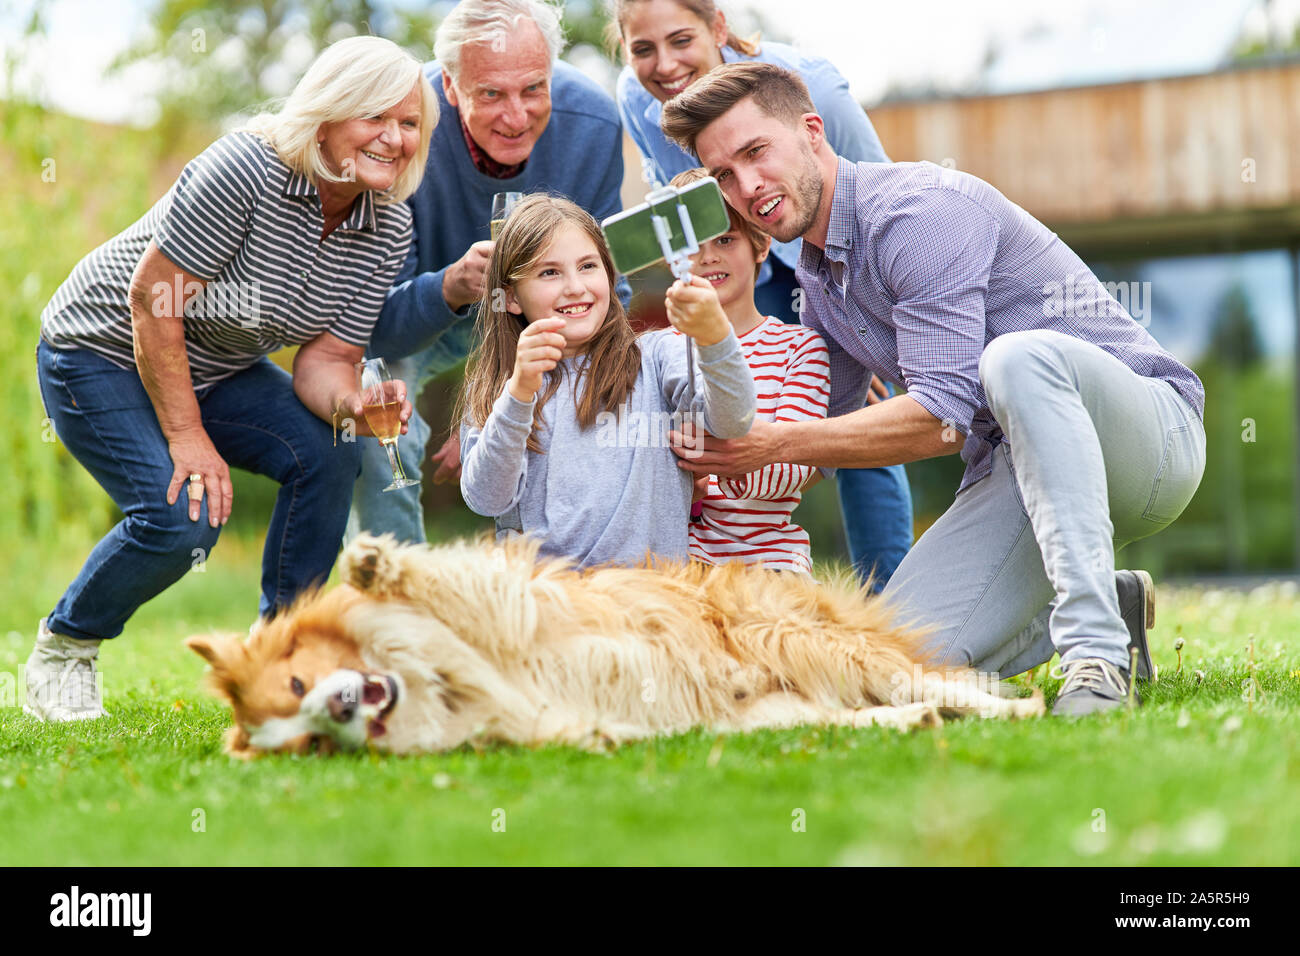 Happy family with grandparents and children makes a selfie in the garden with dog Stock Photo